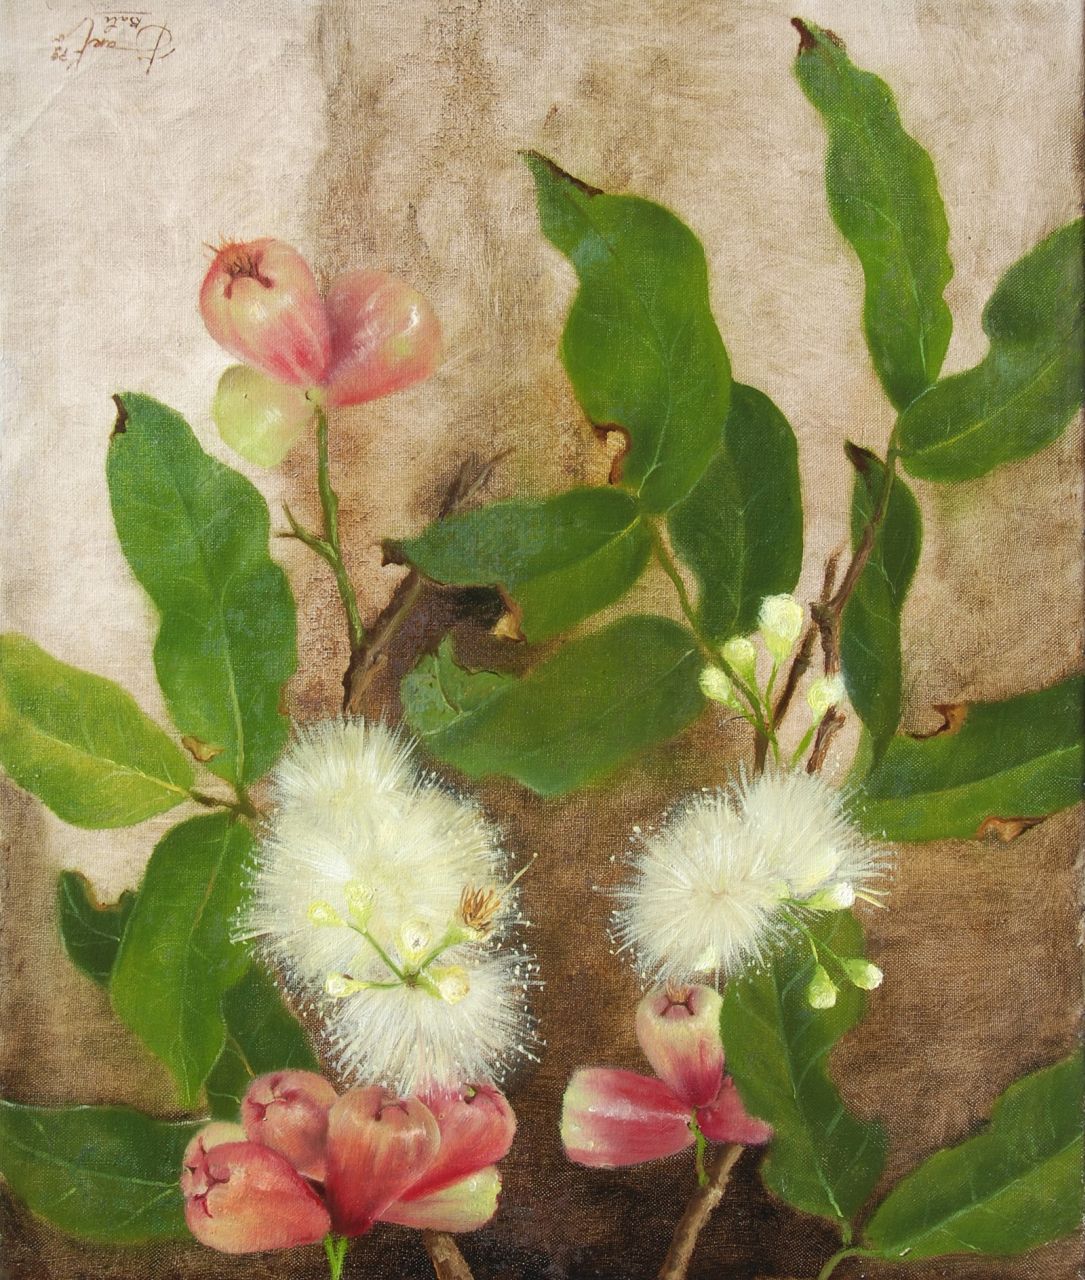 Jarto | Silk tree in bloom, oil on canvas, 60.3 x 50.2 cm, signed l.r. and dated ' 79